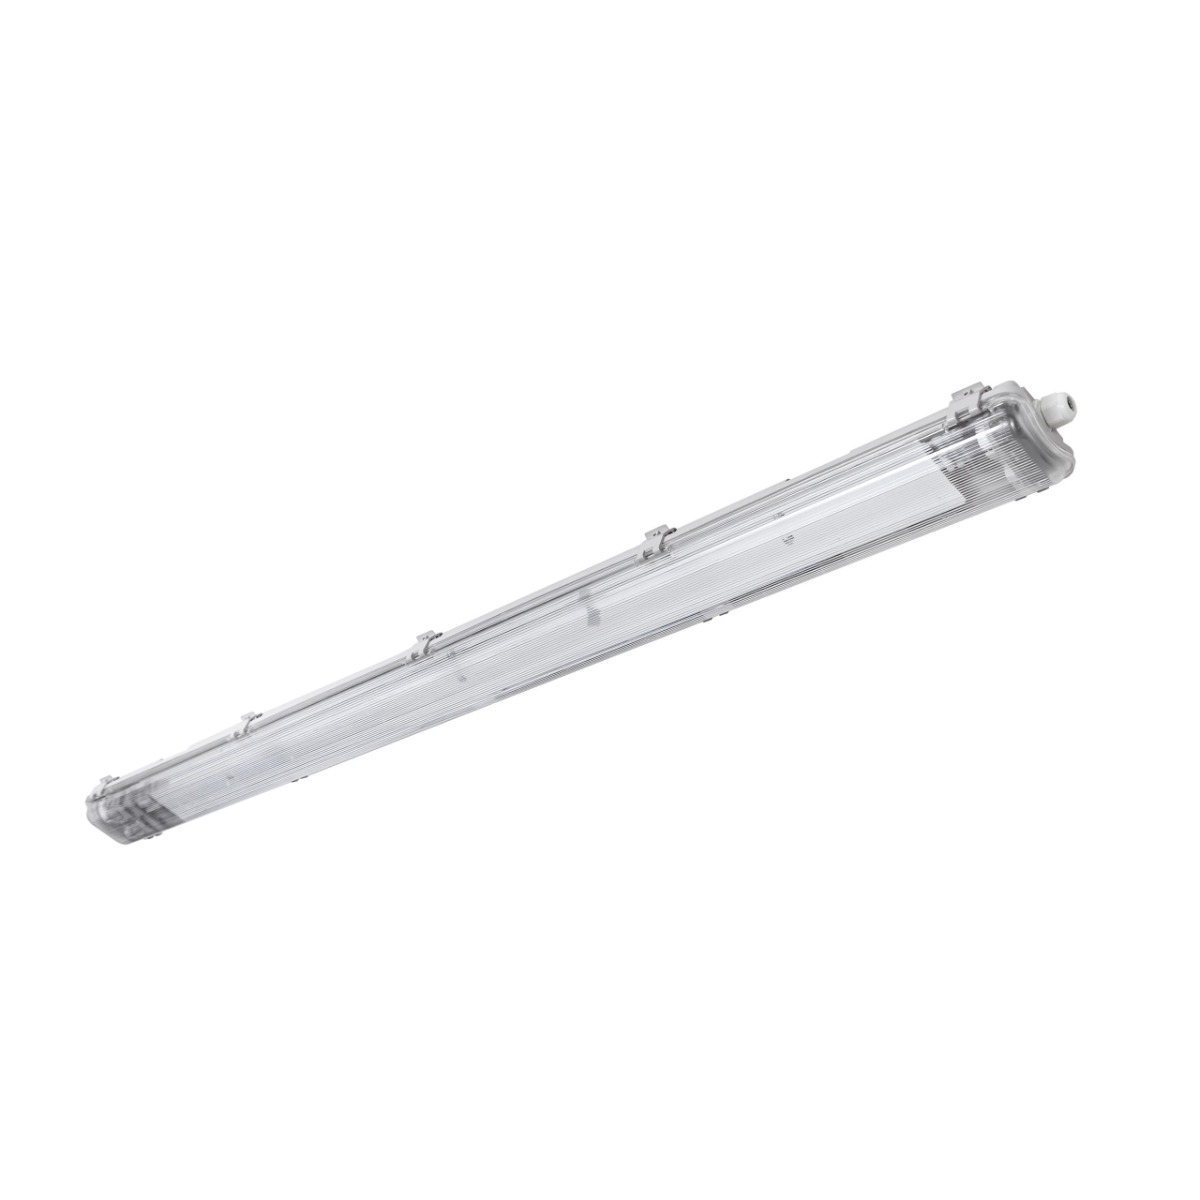 120cm Vapor Tight LED Linear Fixture for  2xled IP65